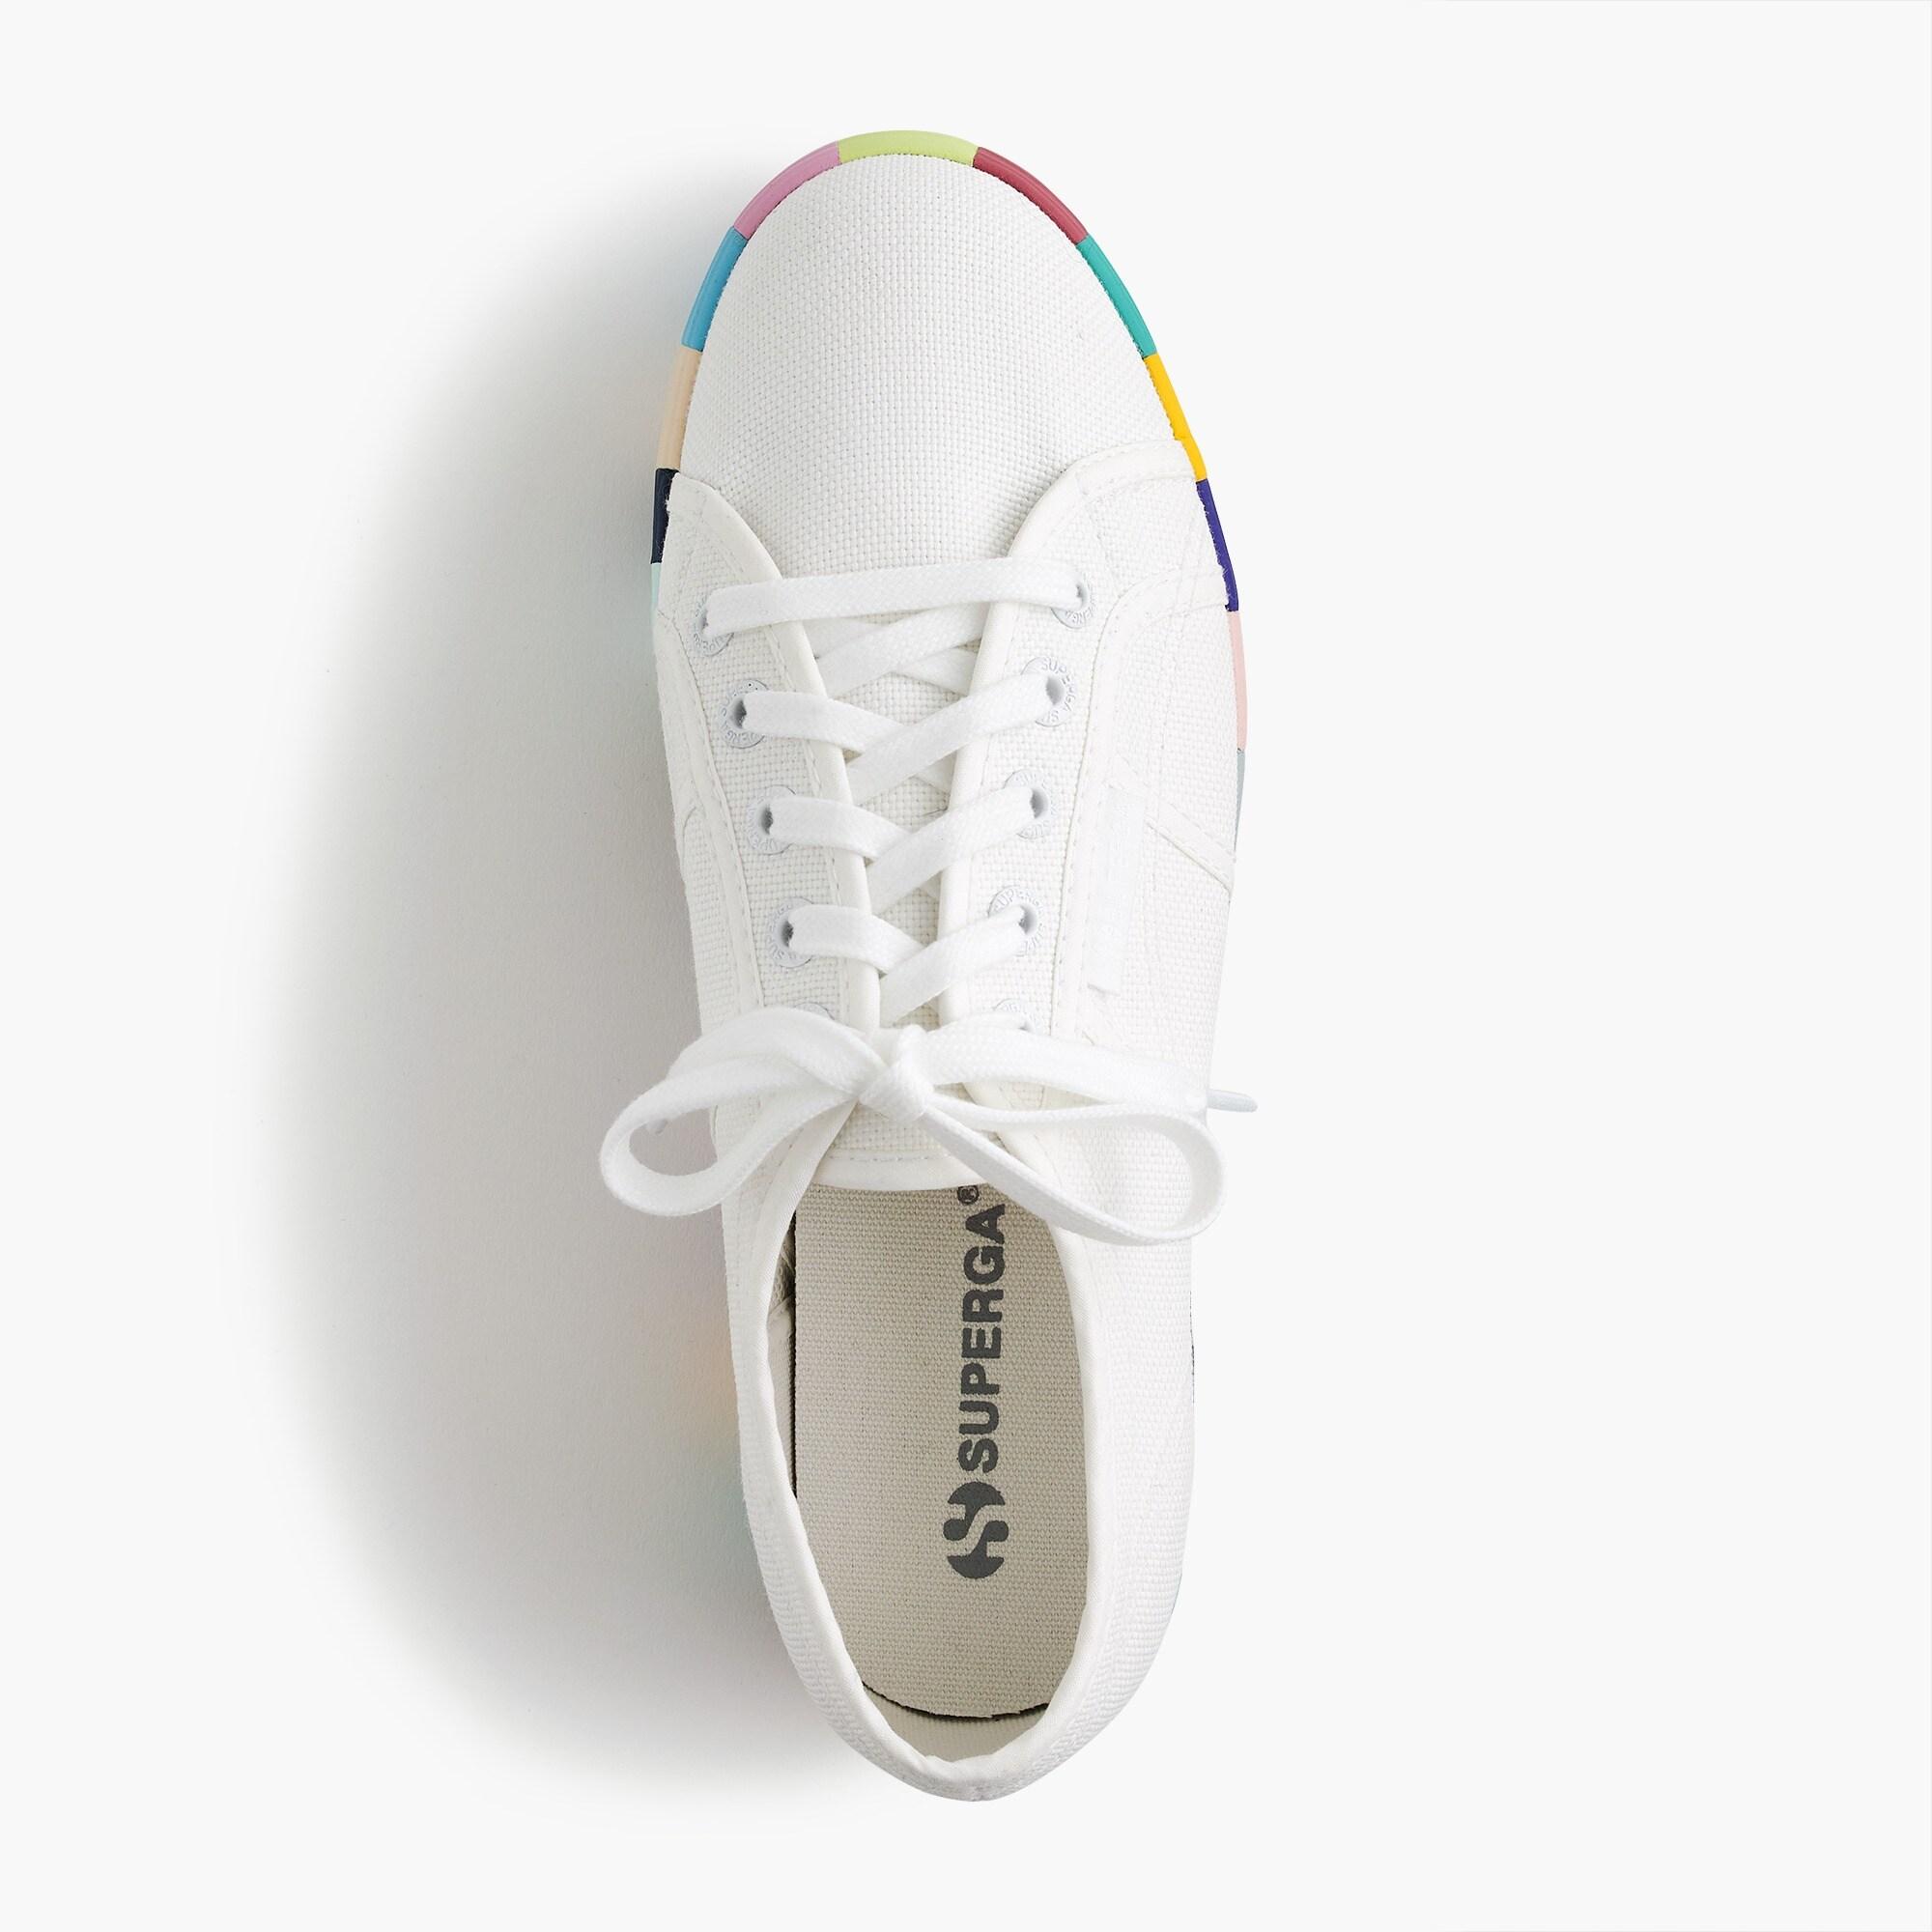 Superga ® 2790 Platform Sneakers With Rainbow Sole in White | Lyst